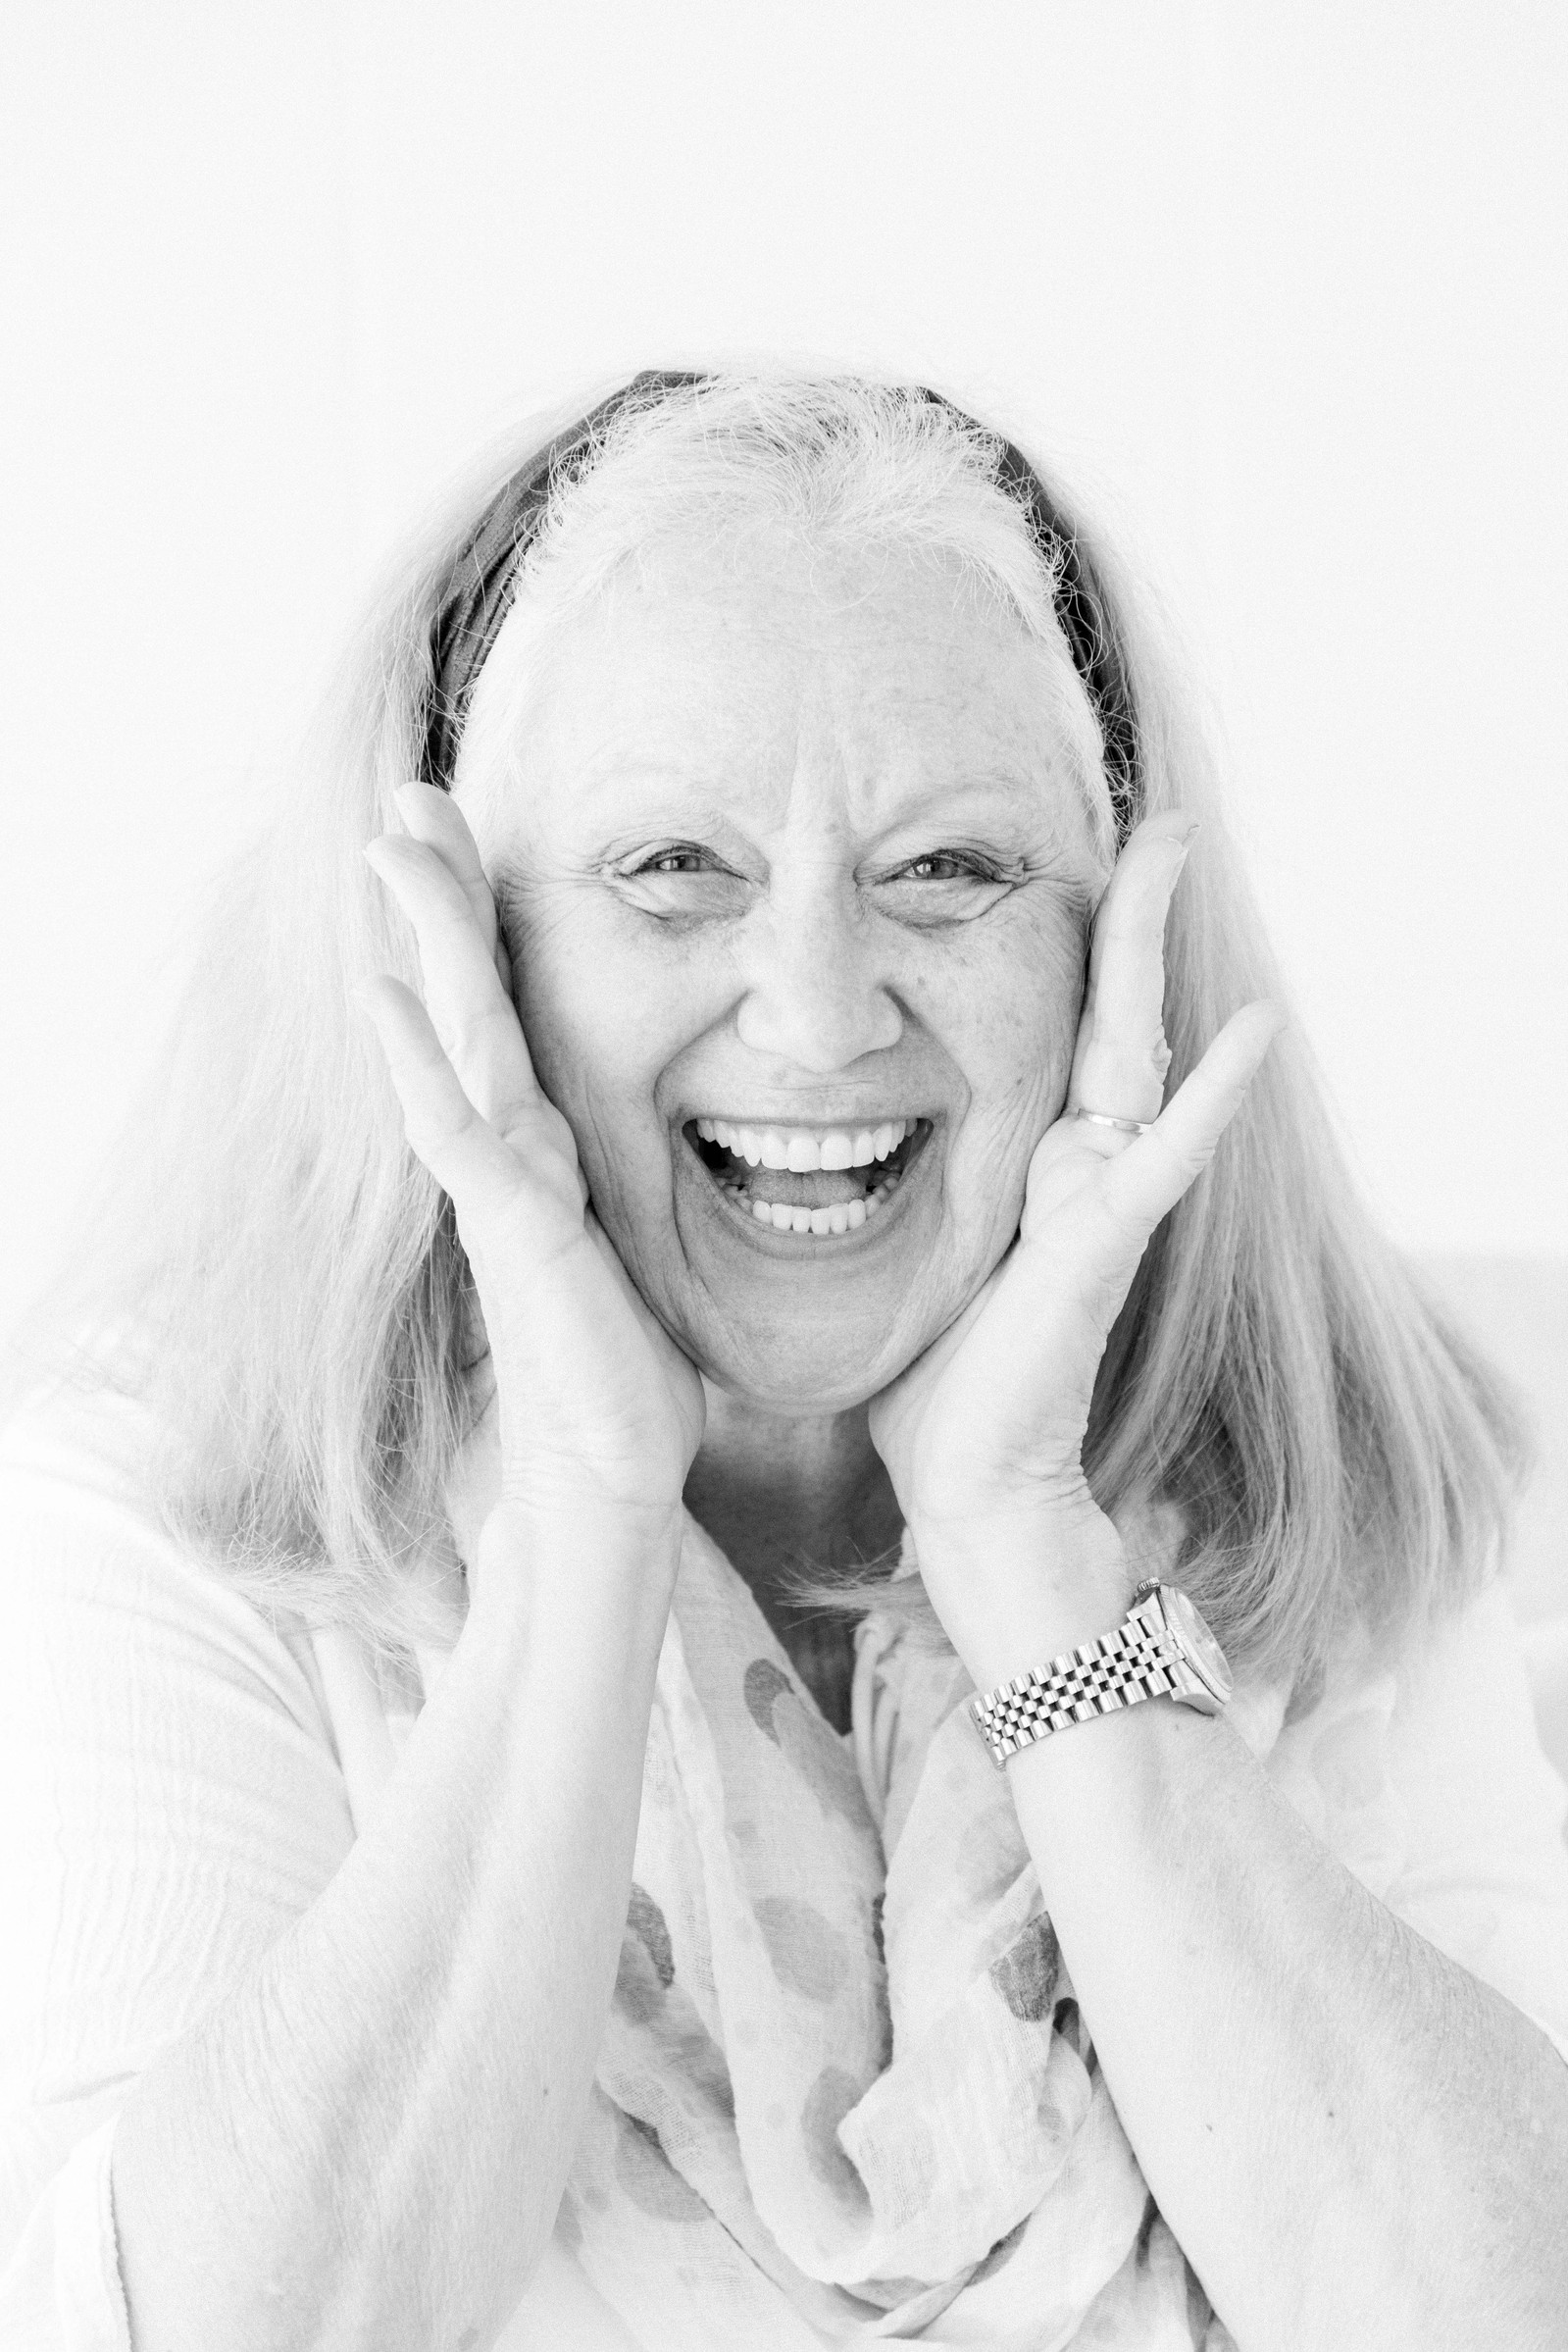 Black and white close up portrait of woman holding her face and laughing. Emily VanderBeek Photography, branding photography, portrait photography, Niagara portrait photographer, Niagara branding photographer.